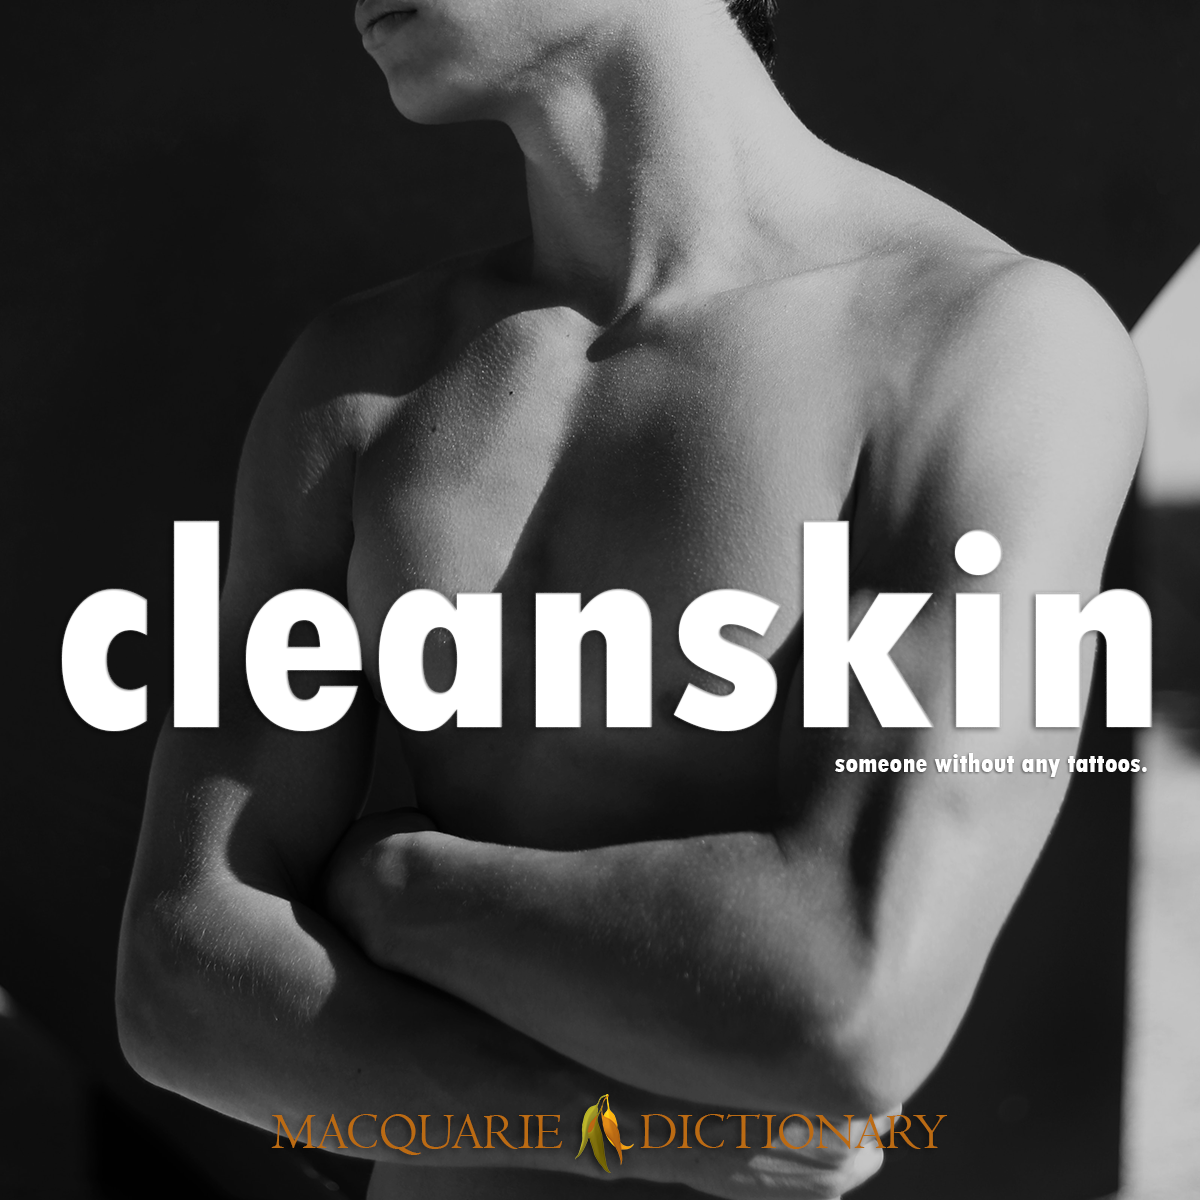 Image of Macquarie Dictionary Word of the Year cleanskin someone without any tattoos.